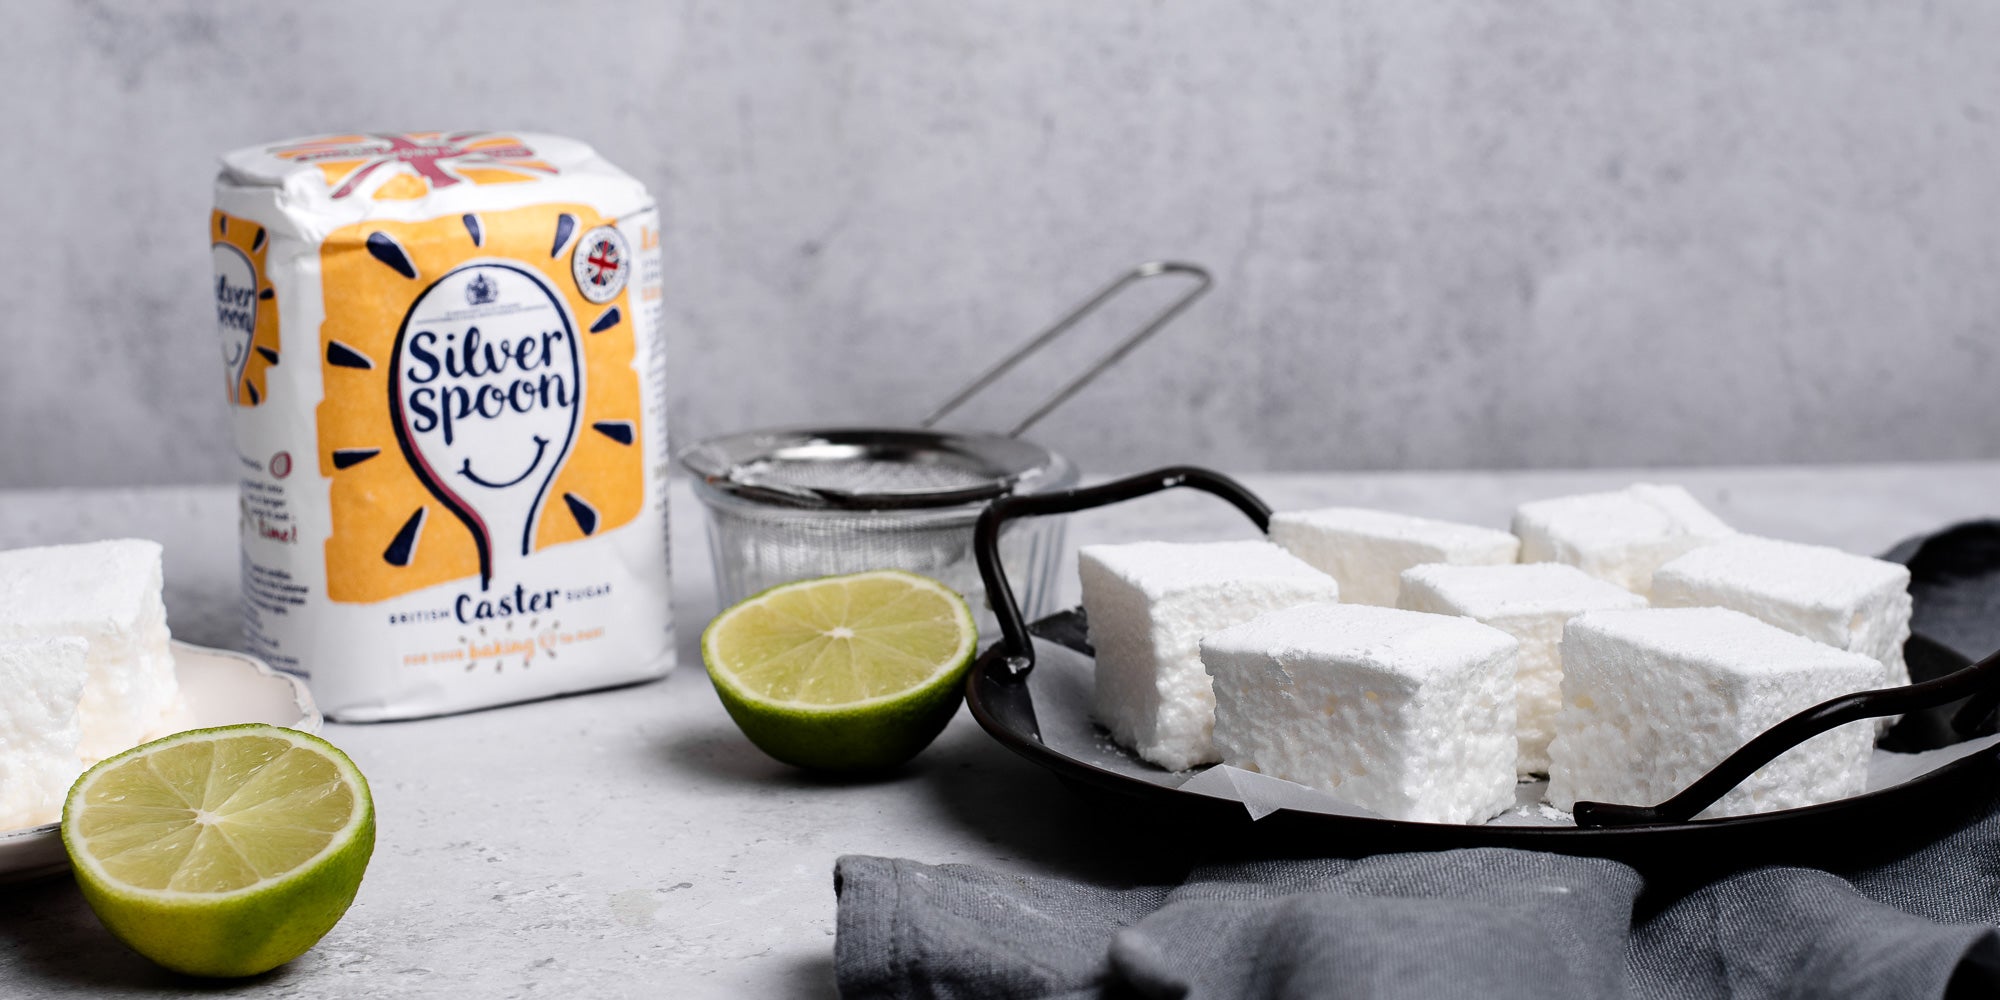 Gin & Tonic Marshmallows next to a bag of Silver Spoon Caster Sugar and sliced lime